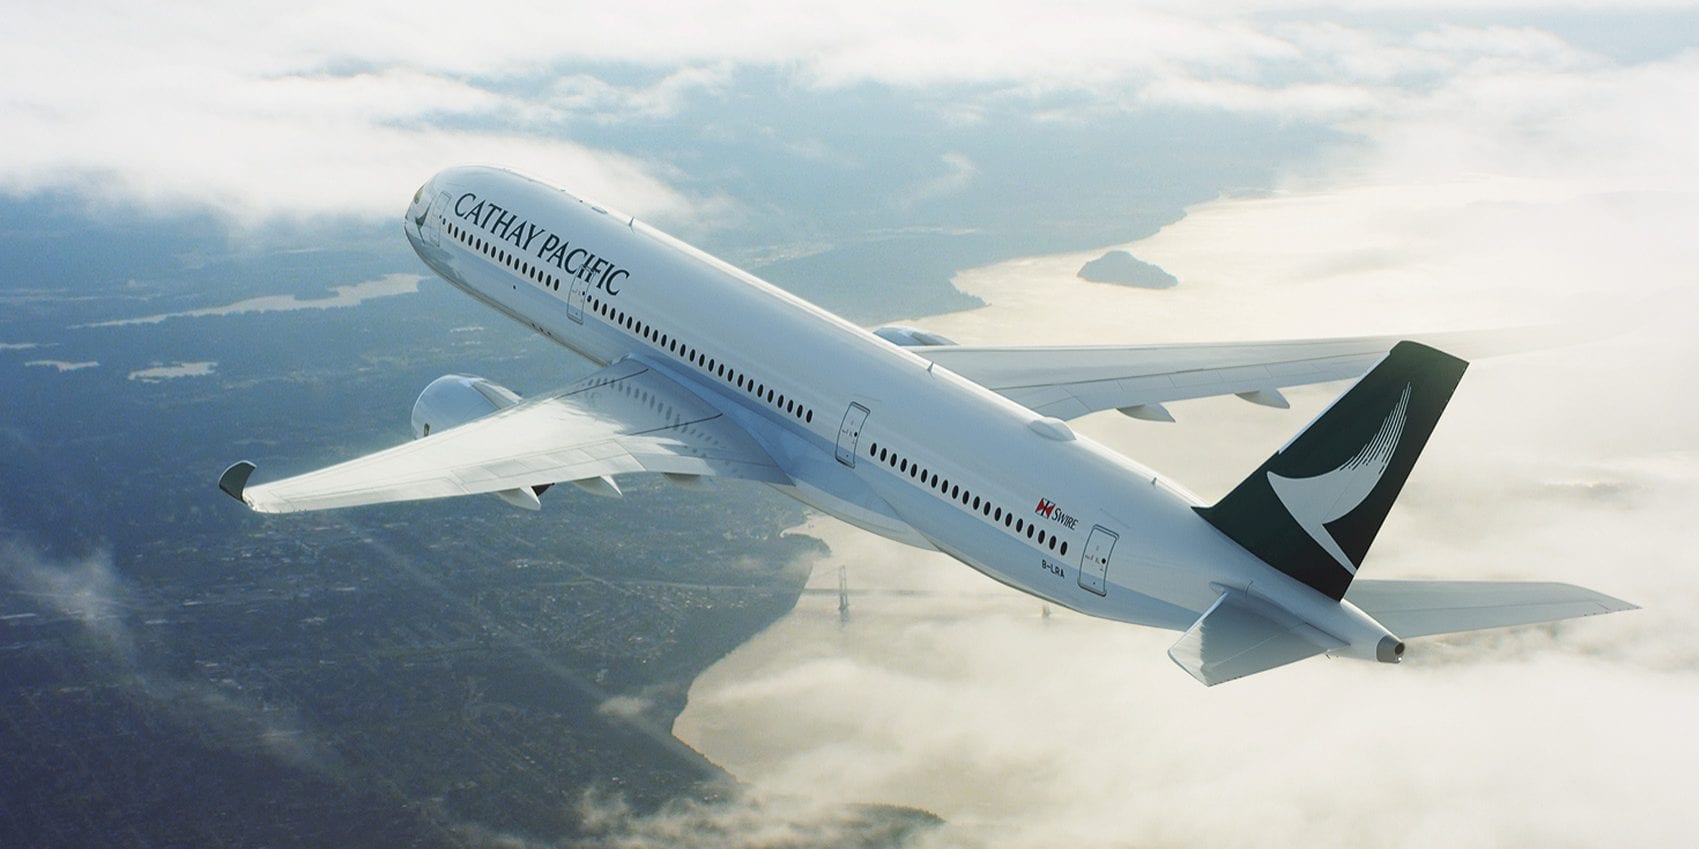 A Cathay Pacific Flight Witnessed North Korean Missile